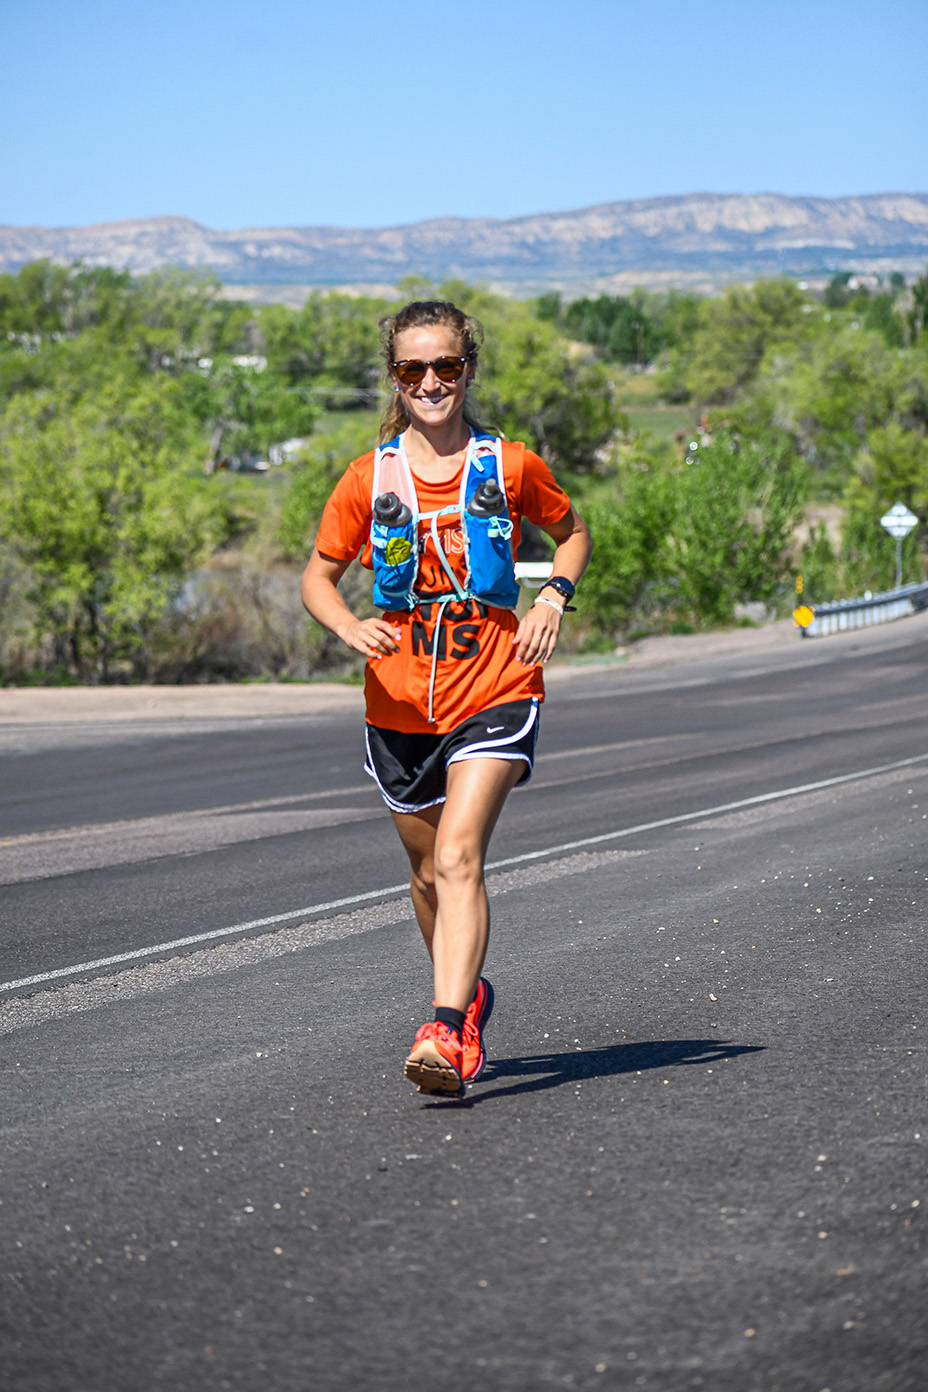 Meghan Guhler ‘16 running on road with mountains behind her